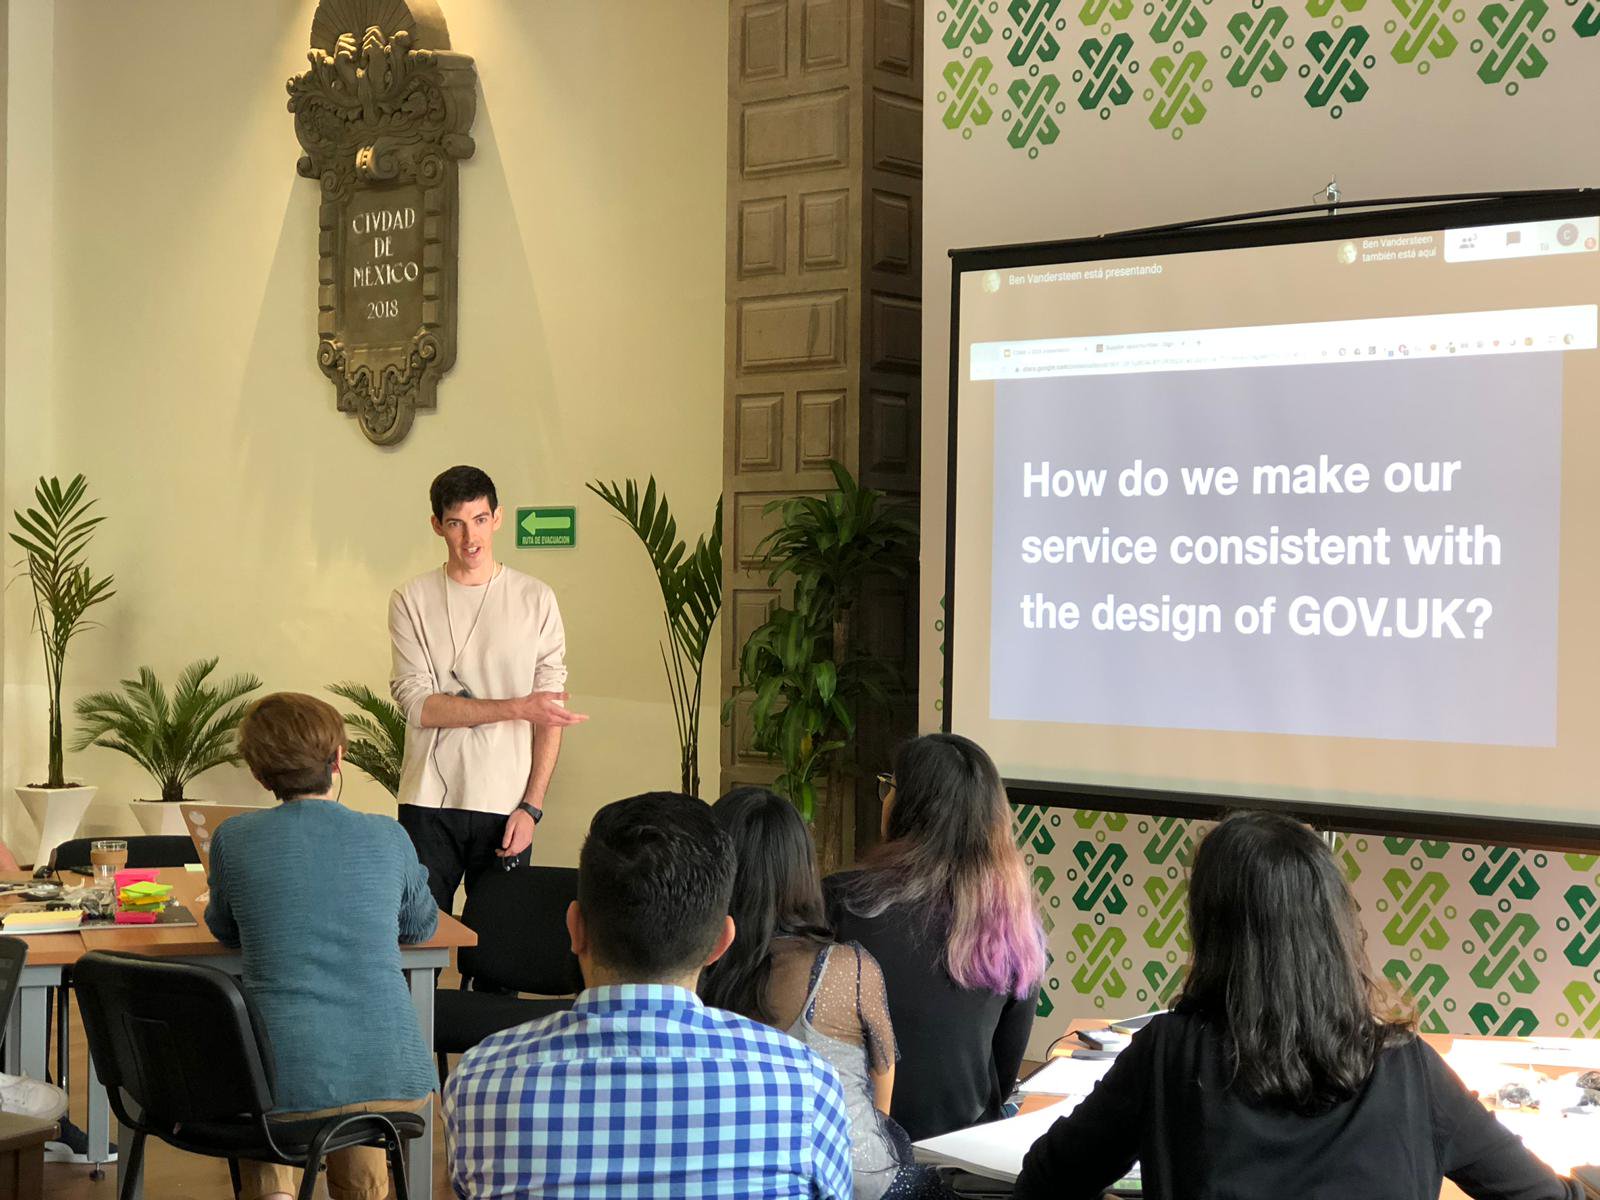 Laurence presenting about design in the UK government